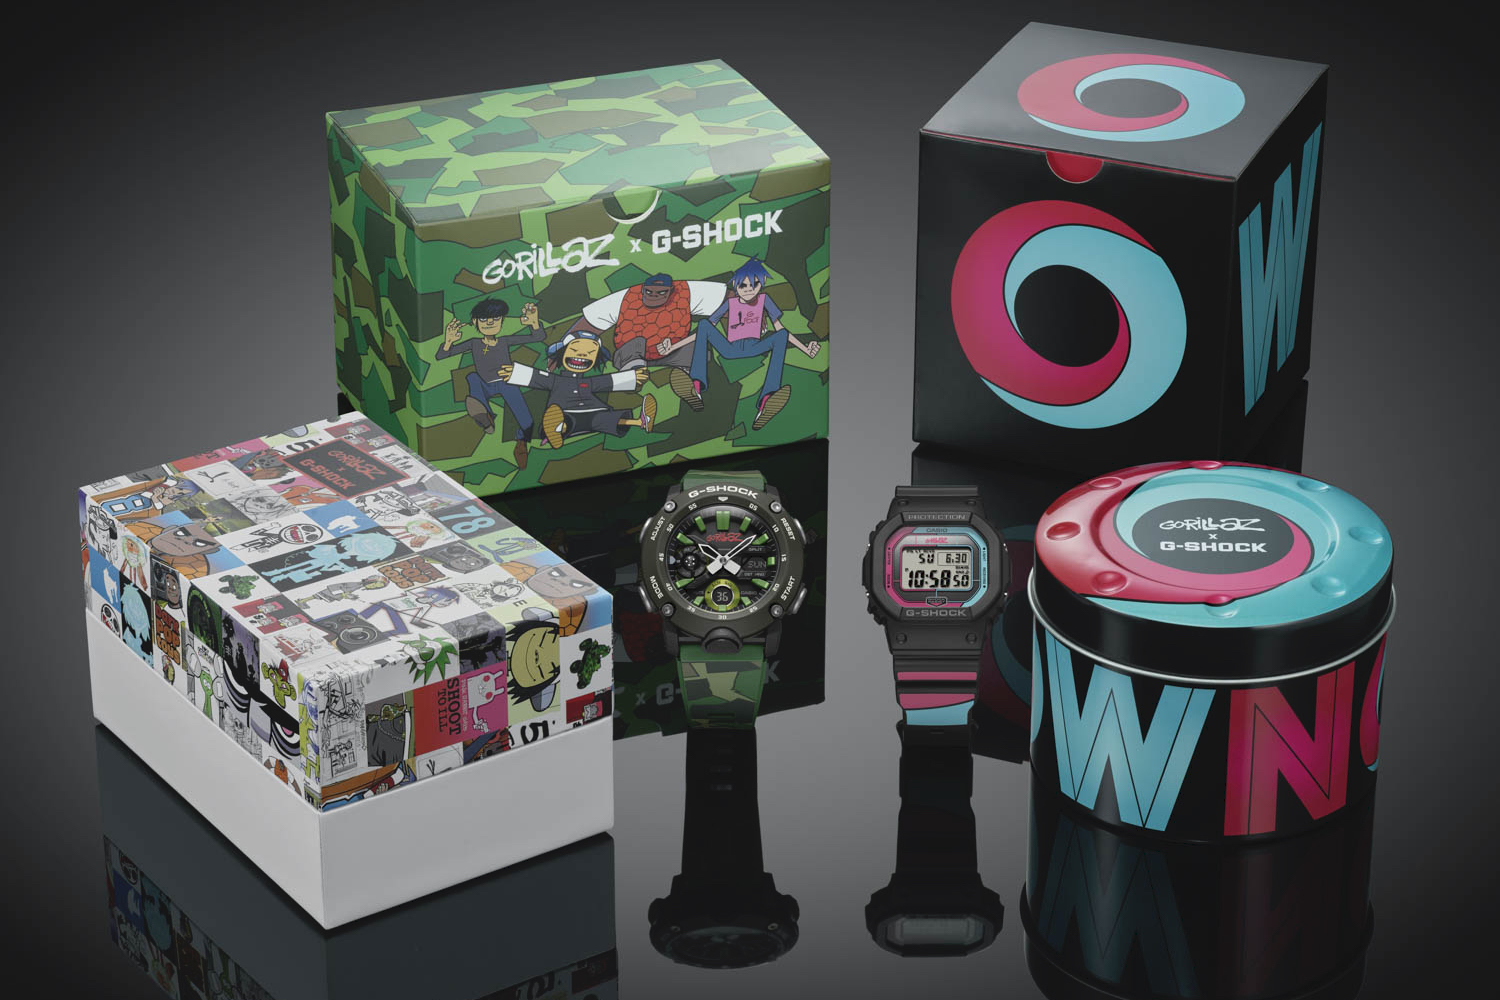 Gorillaz and G-Shock Limited Edition Watch Gets Bluetooth Tech ...